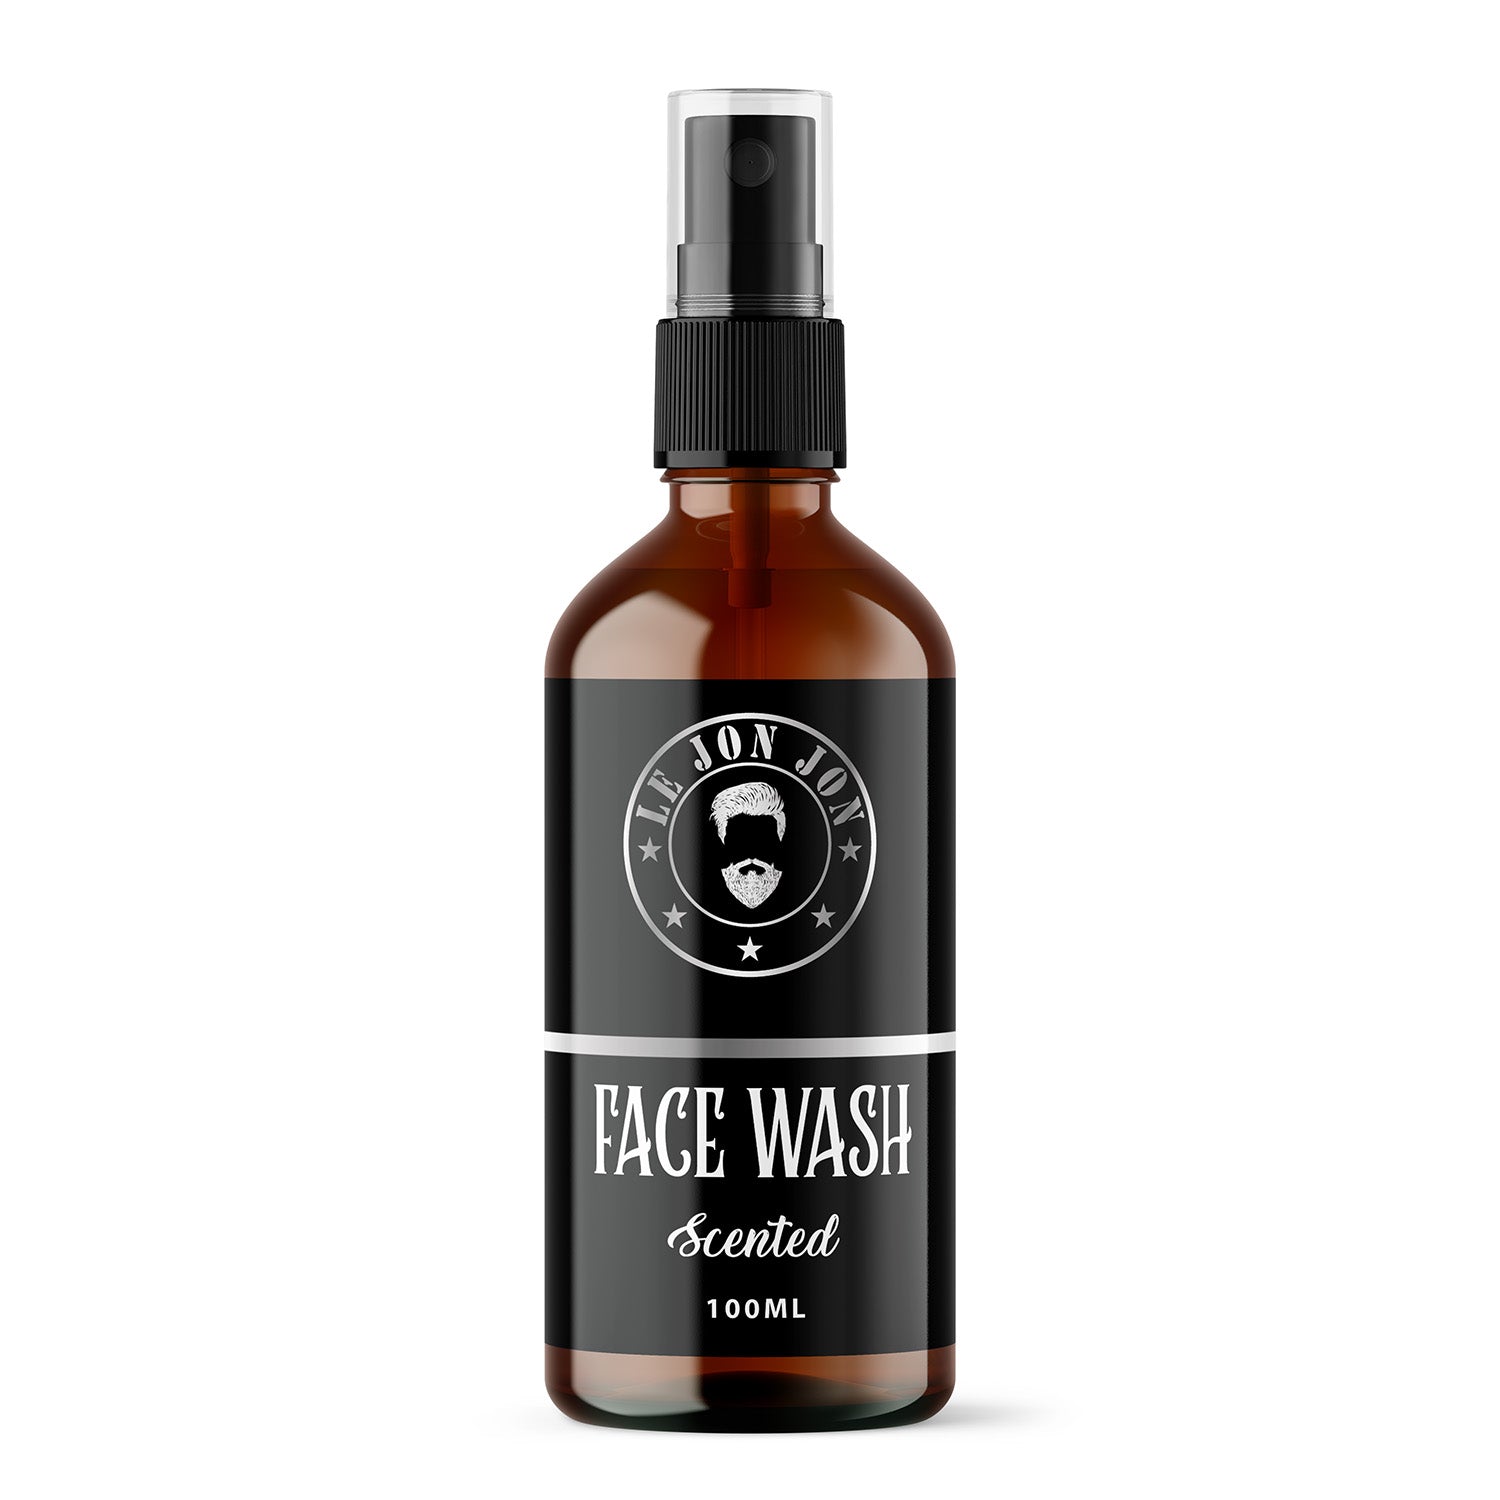 Face wash scented with black label